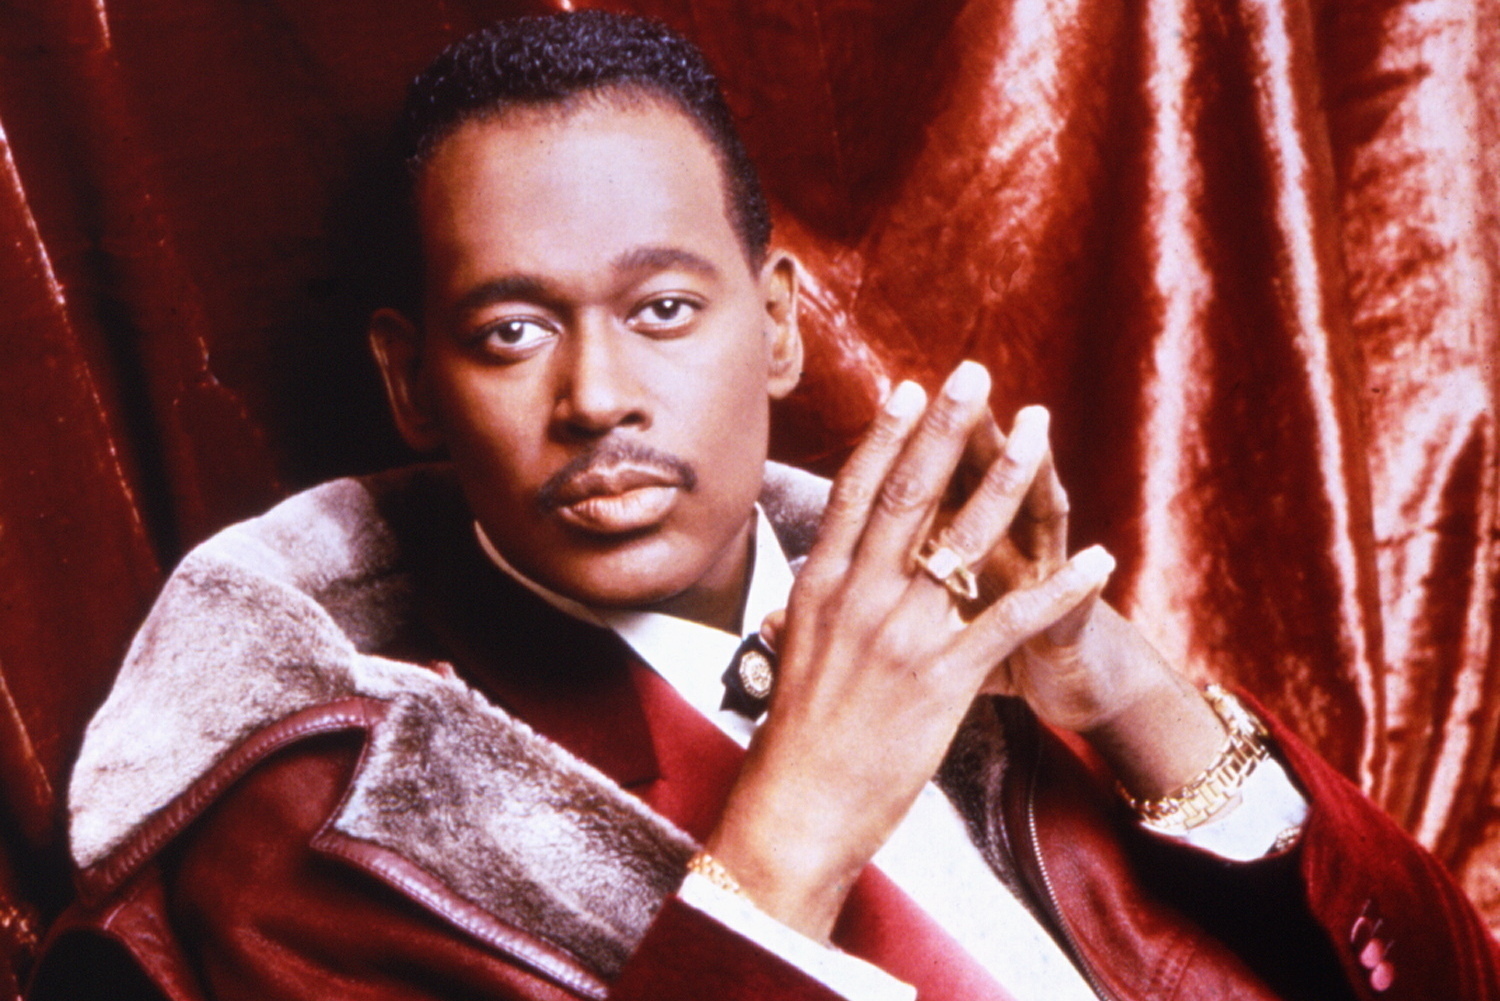 Luther Vandross Backgrounds, Compatible - PC, Mobile, Gadgets| 1500x1001 px